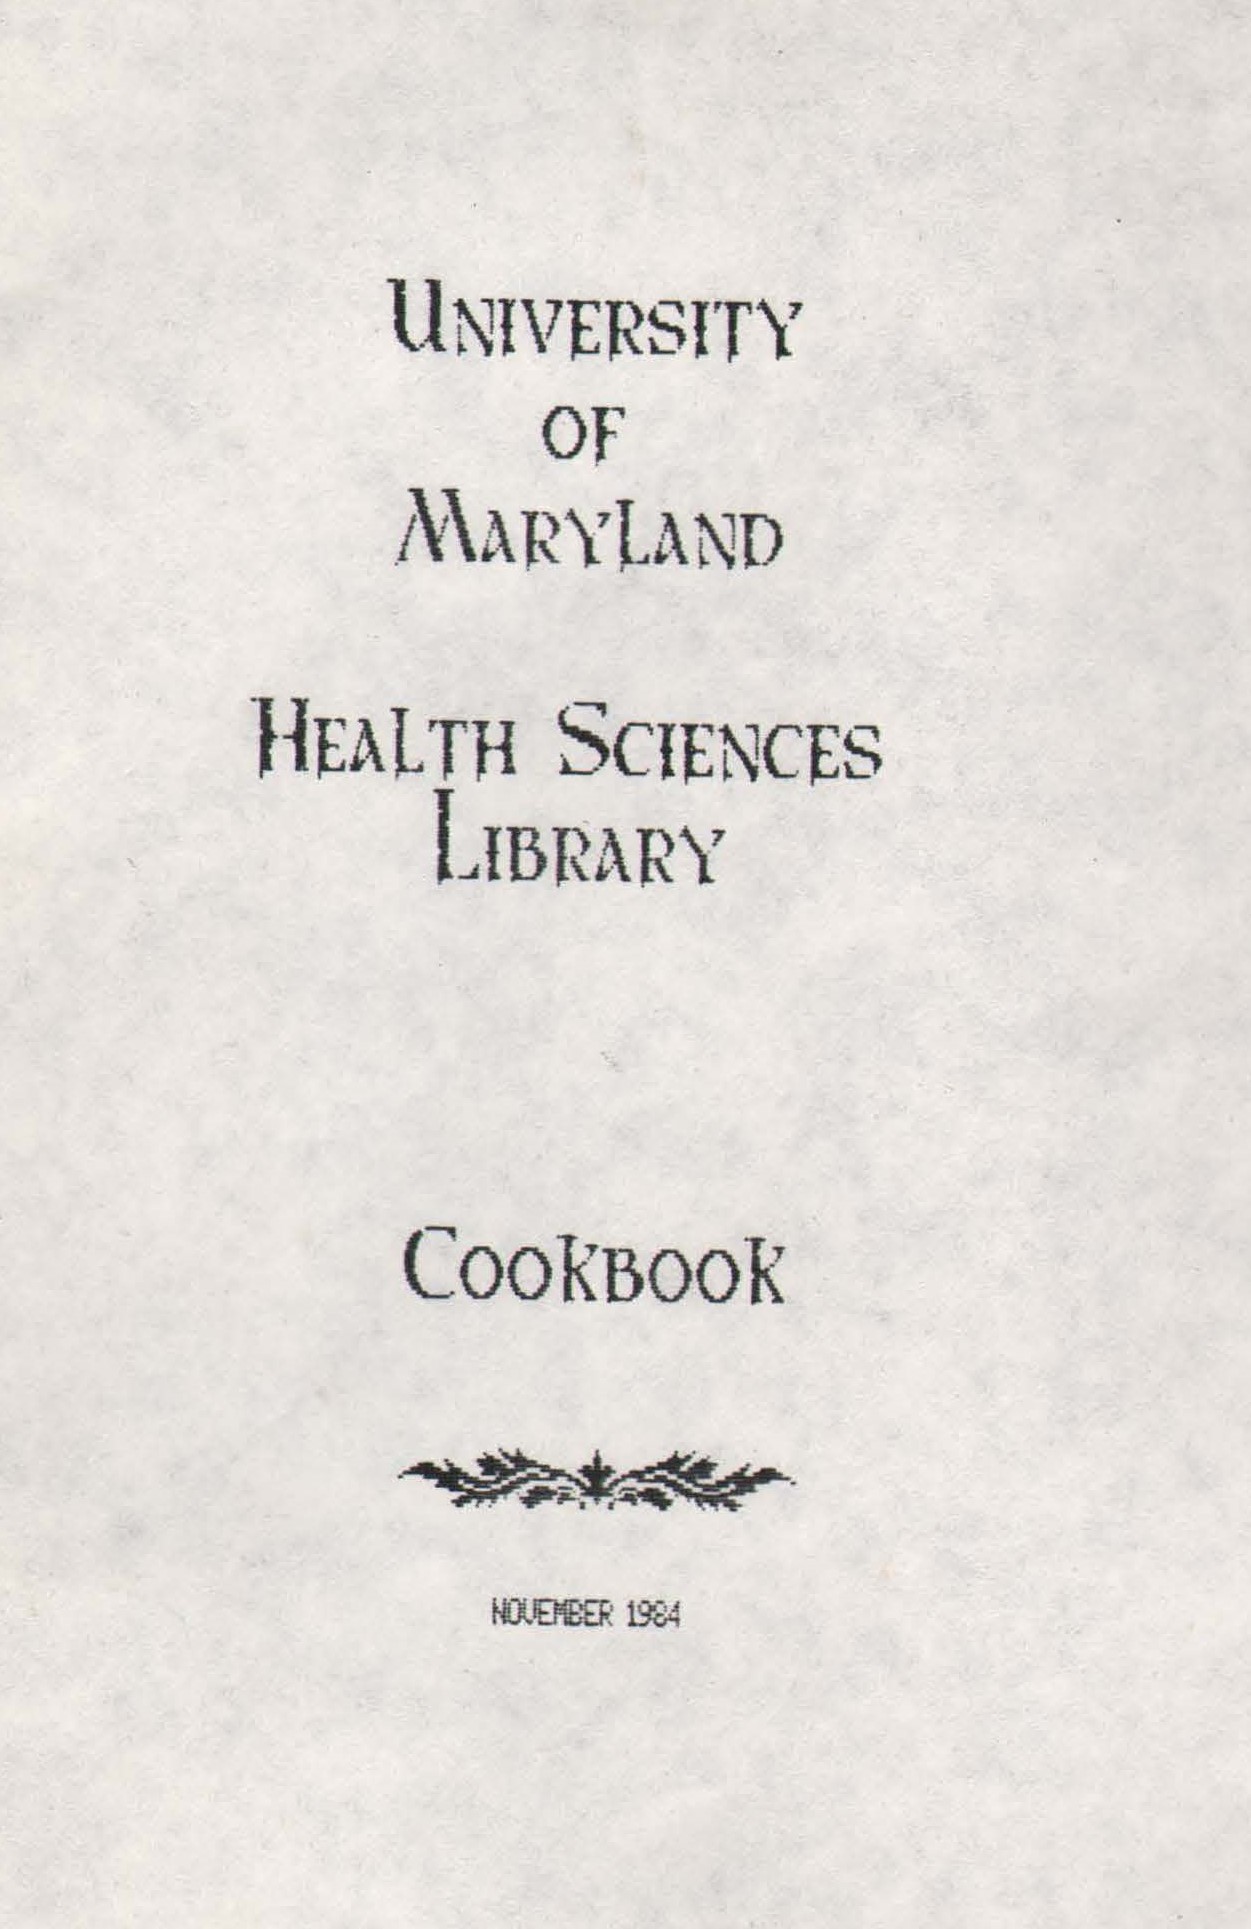 Cover page of the Health Sciences Library Cookbook, dated November 1984